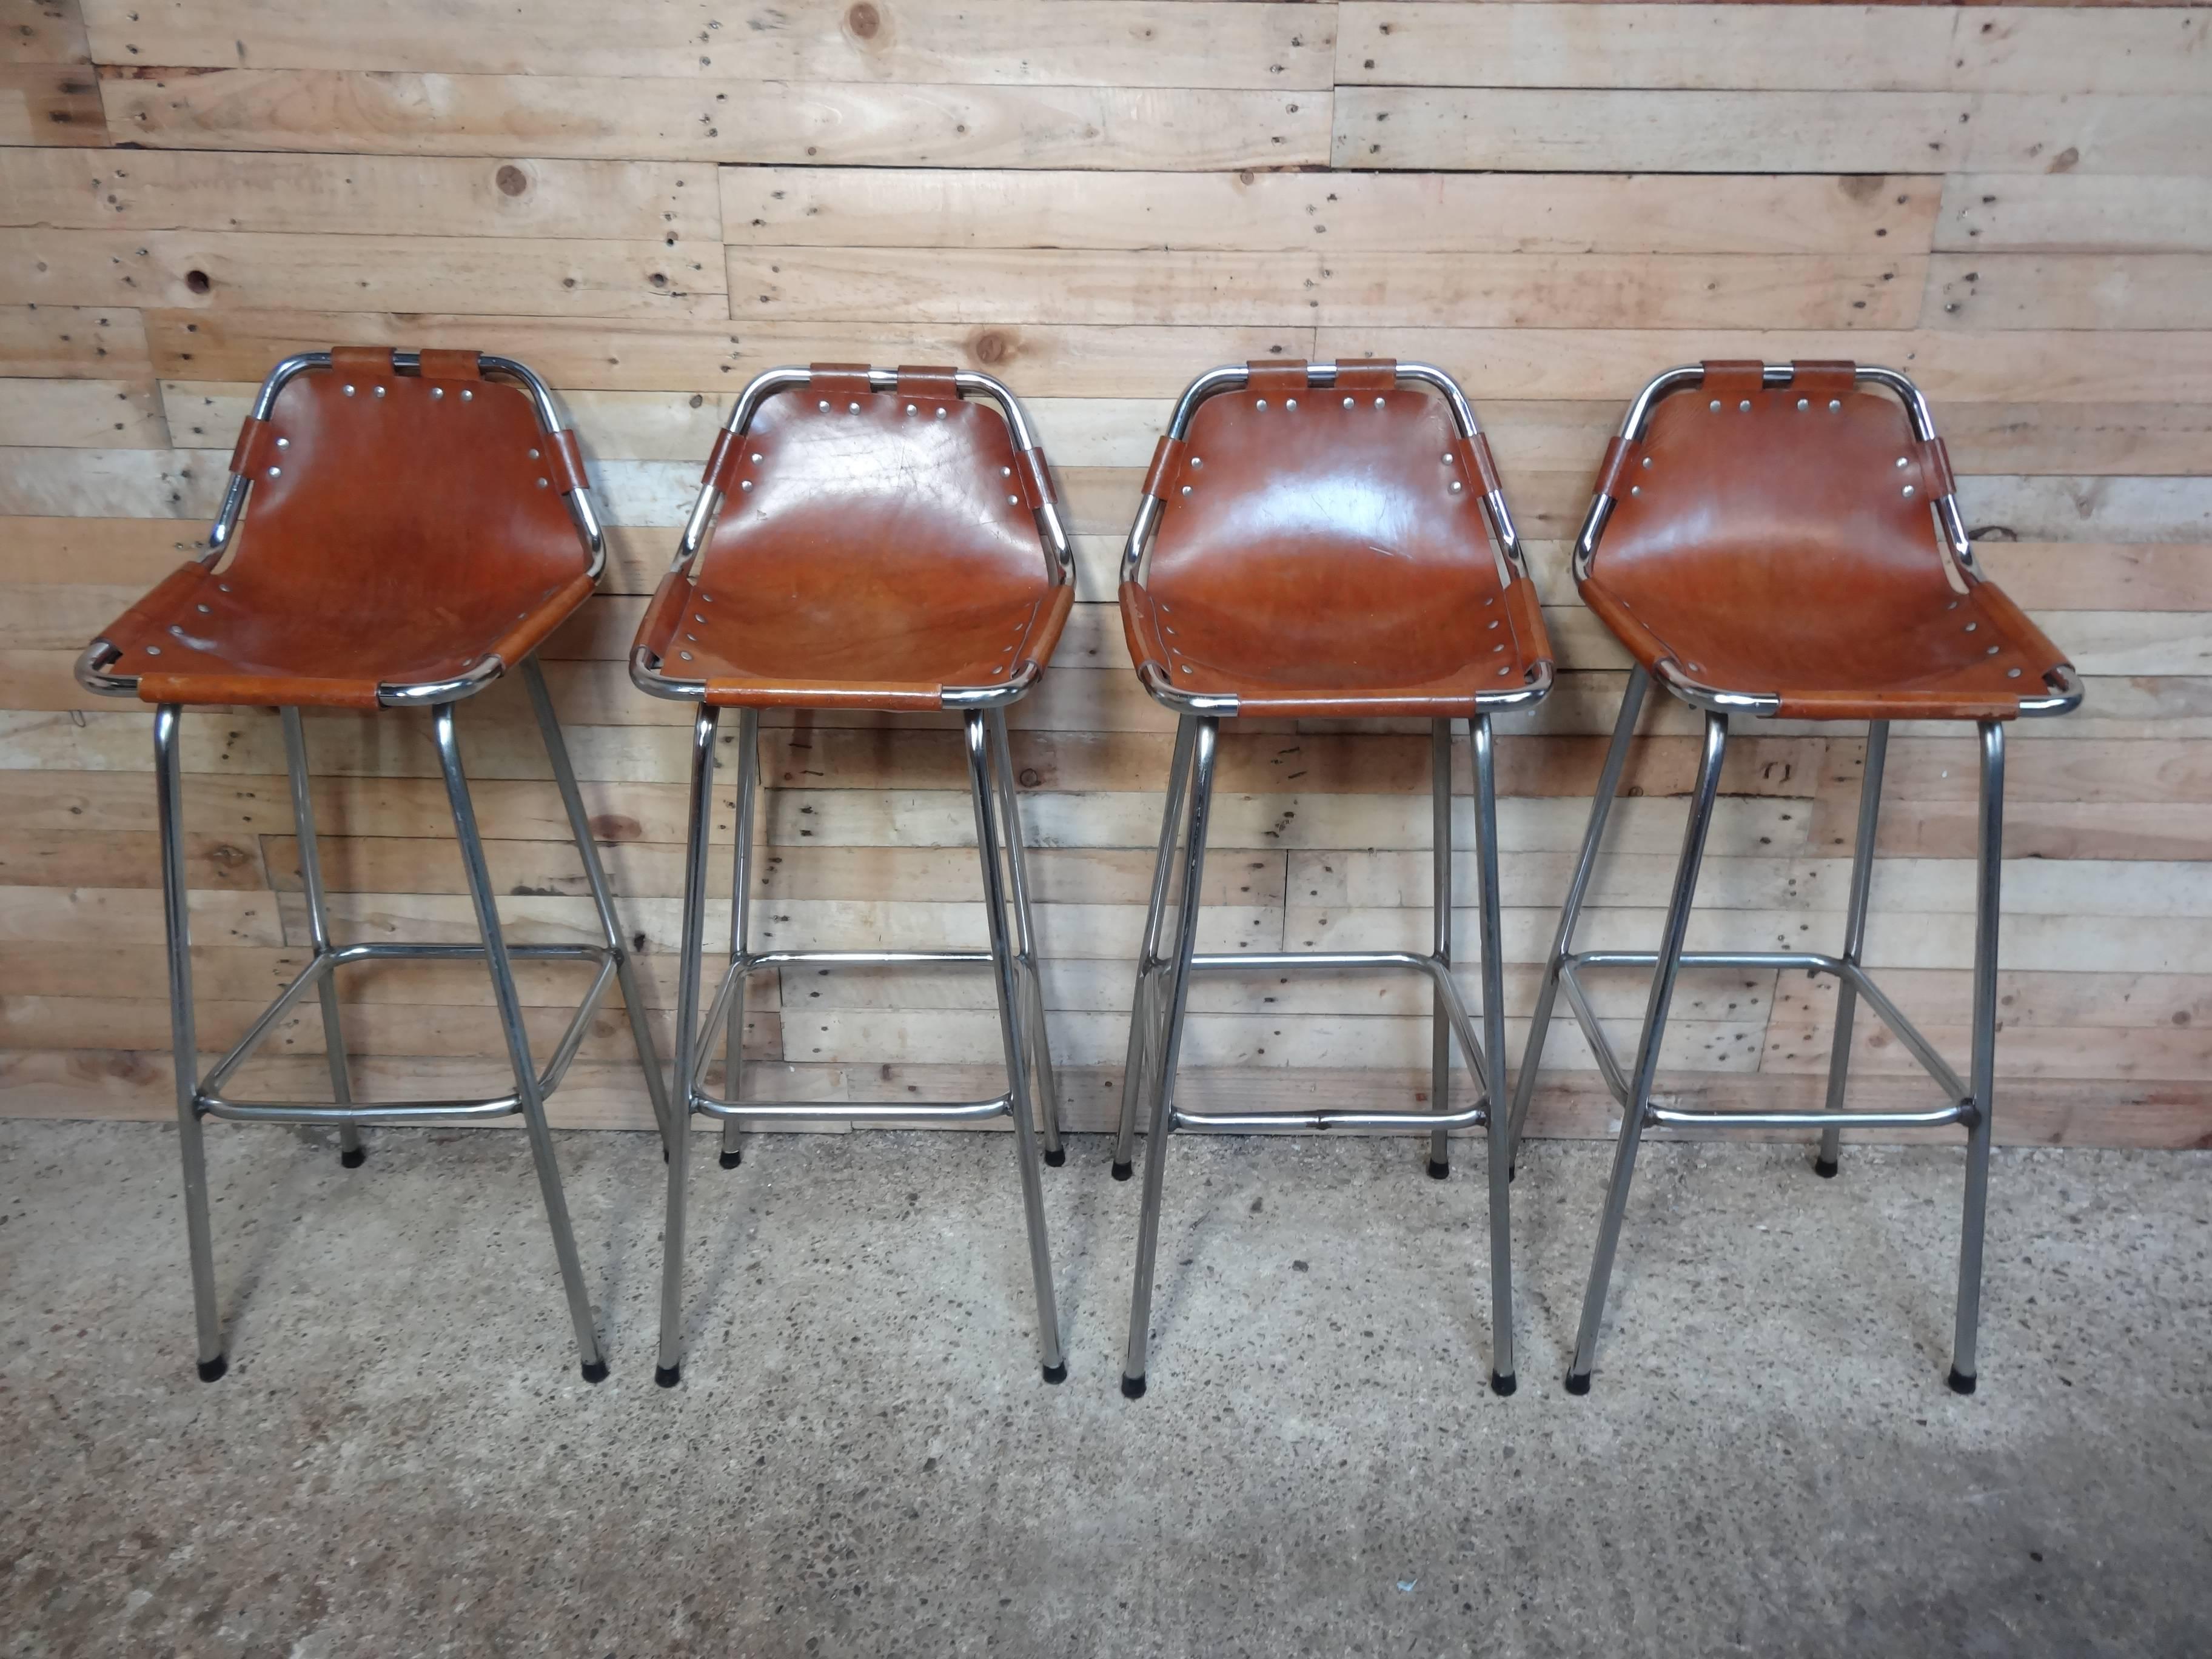 French Selected by Charlotte Perriand for the Les Arcs Ski Resort, Four High Bar Stools